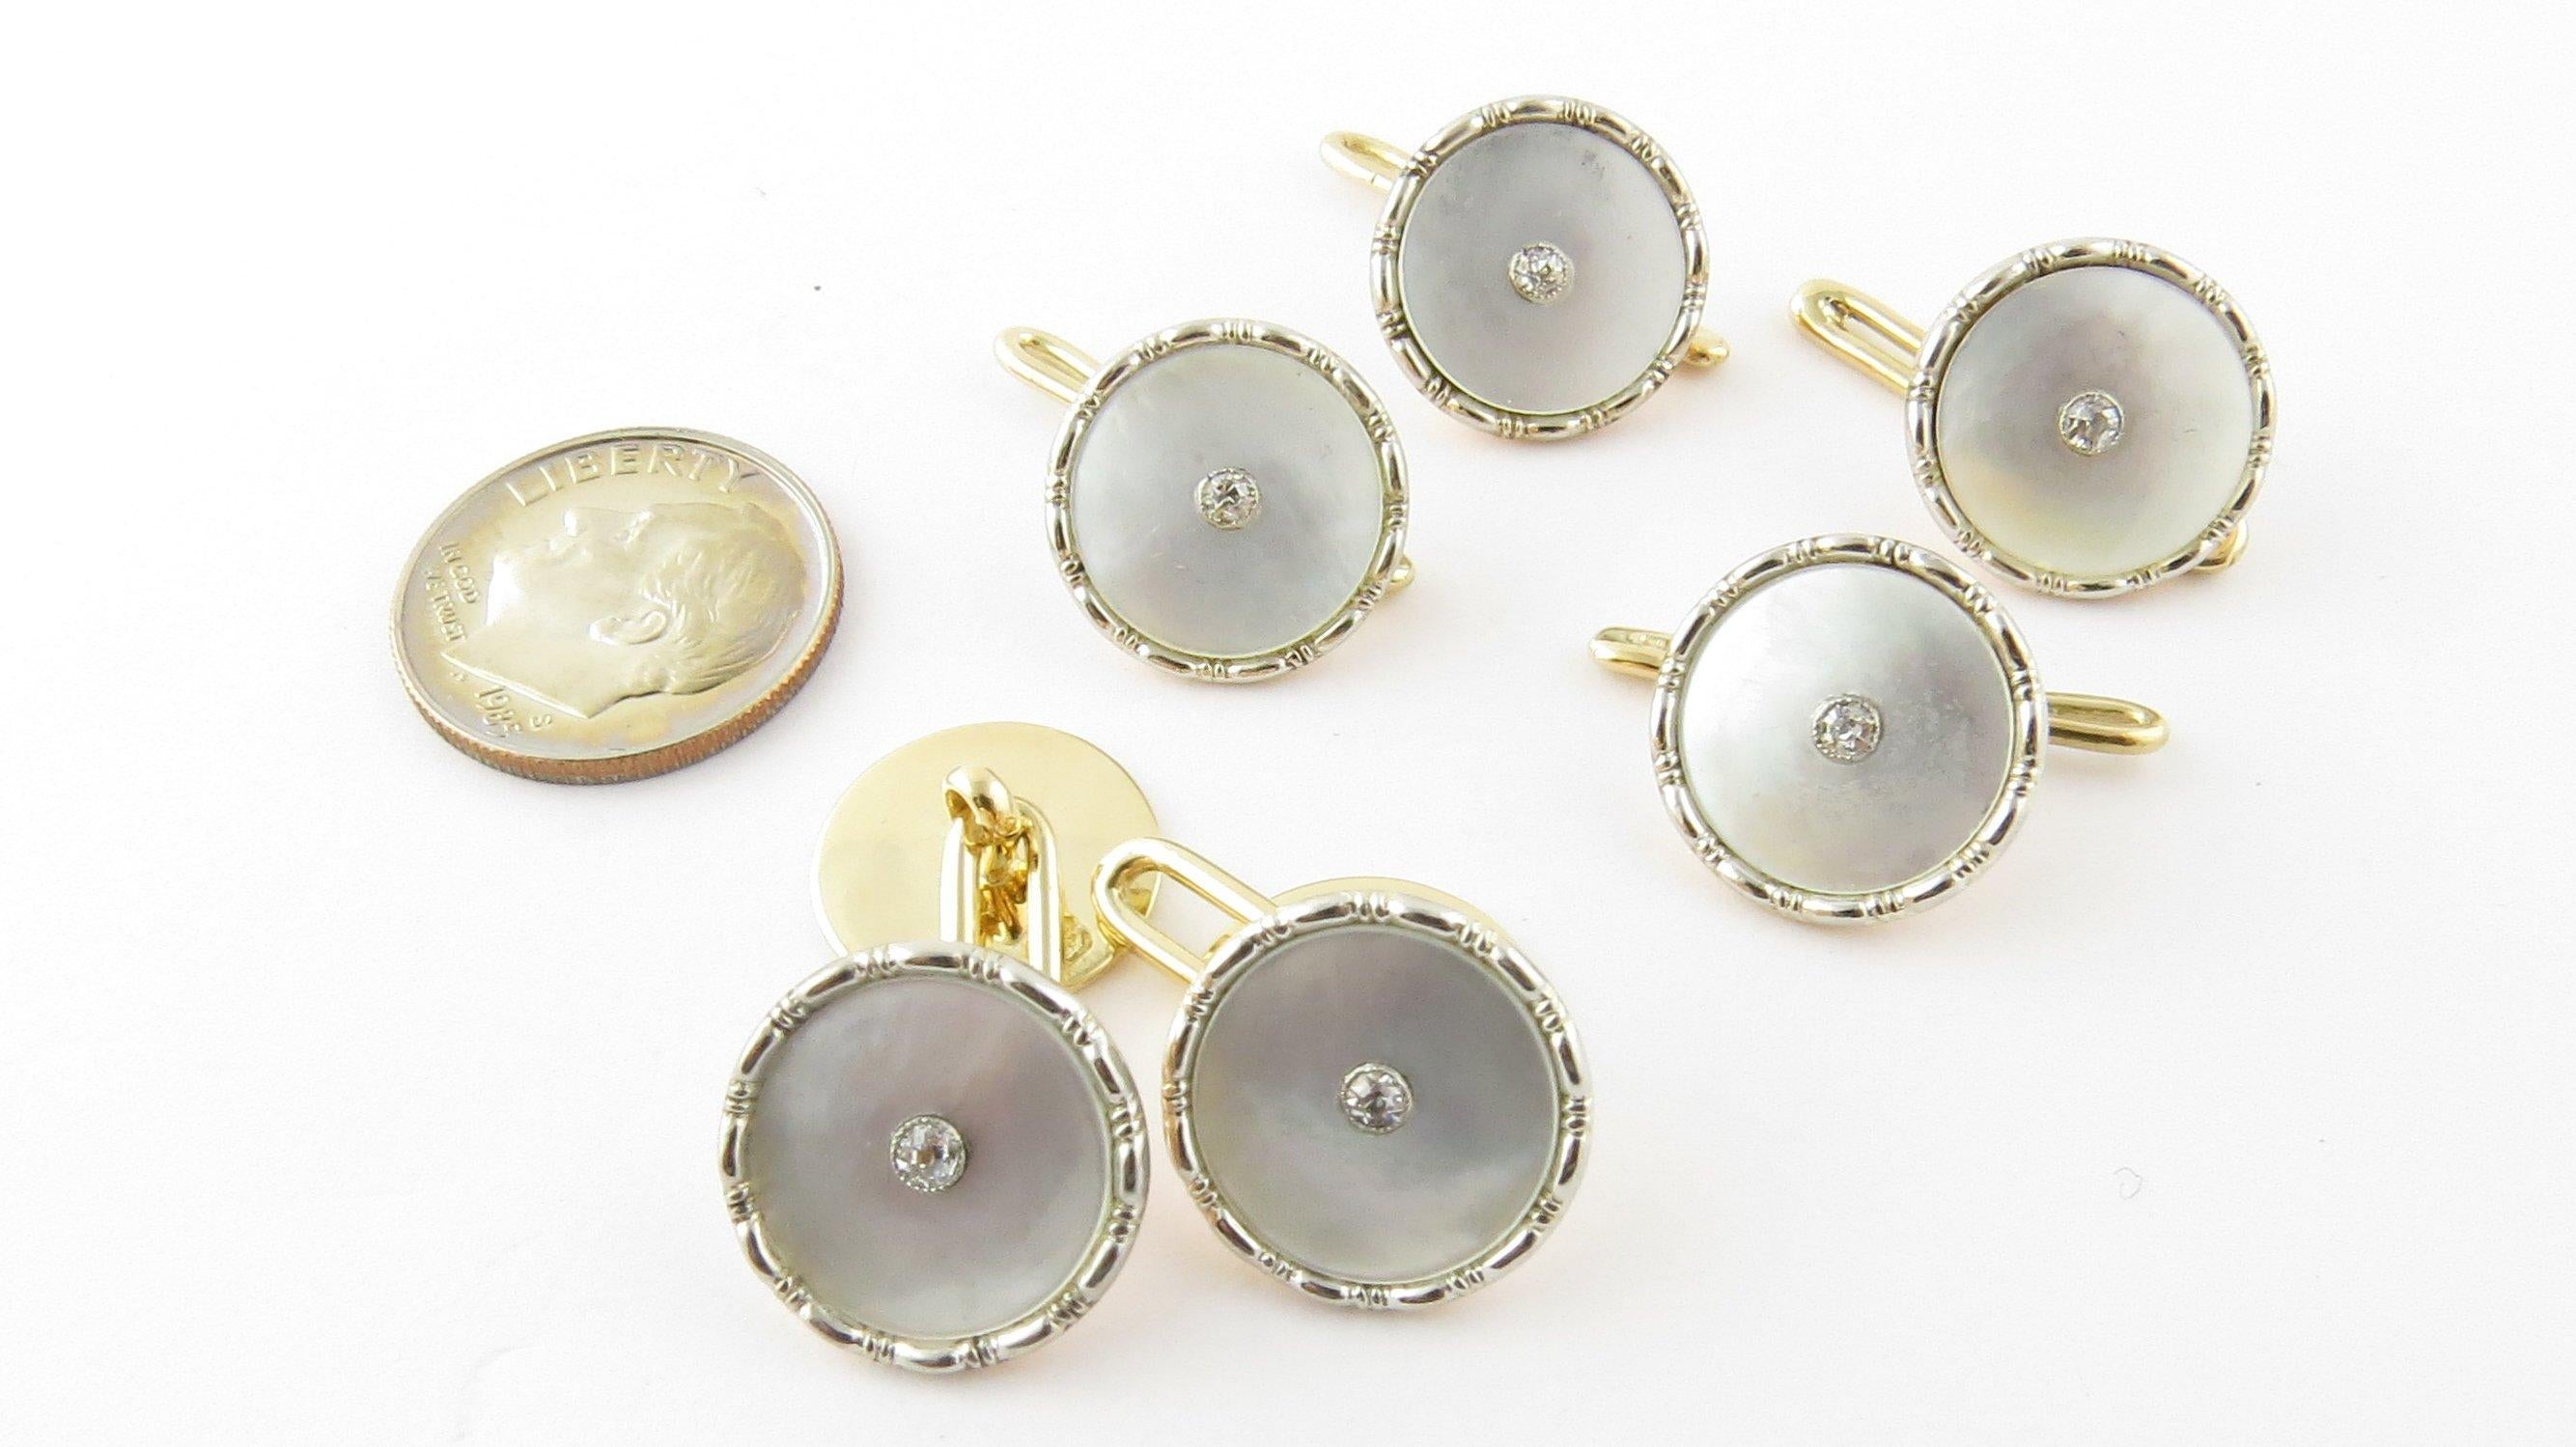 9 Karat Yellow Gold Mother of Pearl and Diamond Tuxedo Buttons and Cufflinks 4